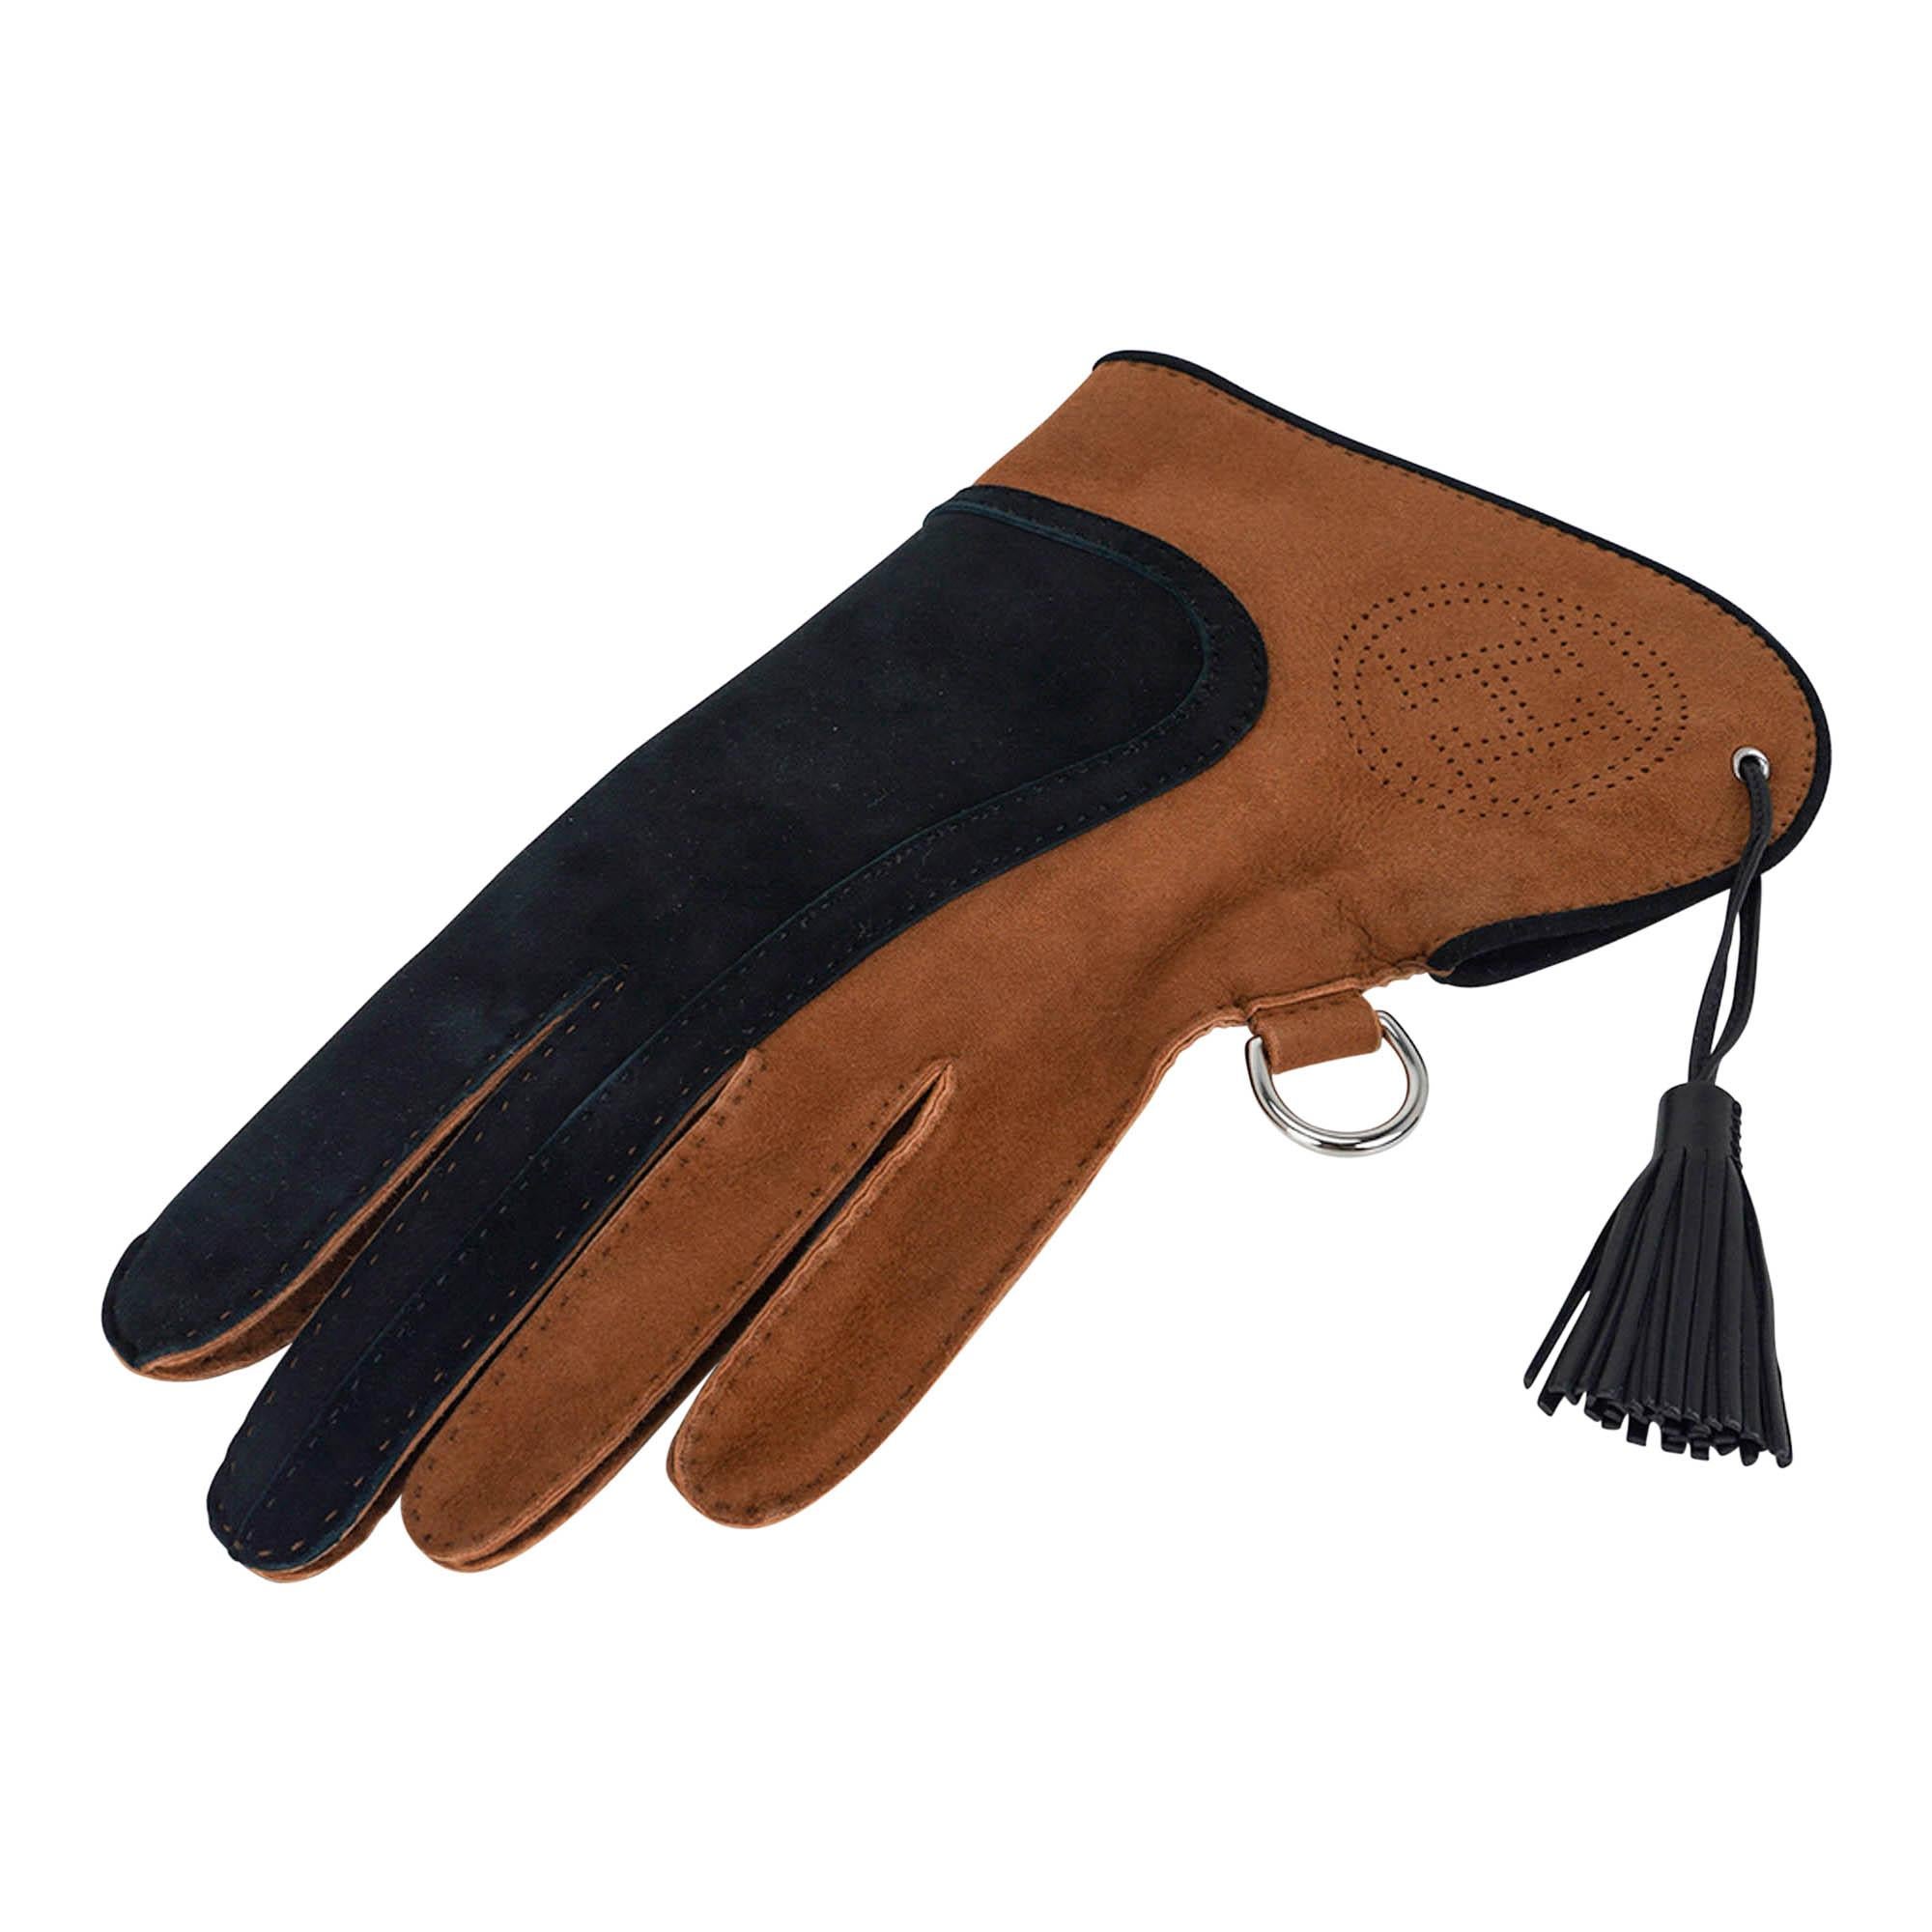 Mightychic offers an Hermes left hand rare Falconry Glove featured in Gold and Black.
Beautifully crafted in lambskin suede.
Palladium plated D ring.
Black lambskin tassel.
NEW or NEVER WORN.
final sale

GLOVE SIZE: 9

GLOVE MEASURES:
12.5